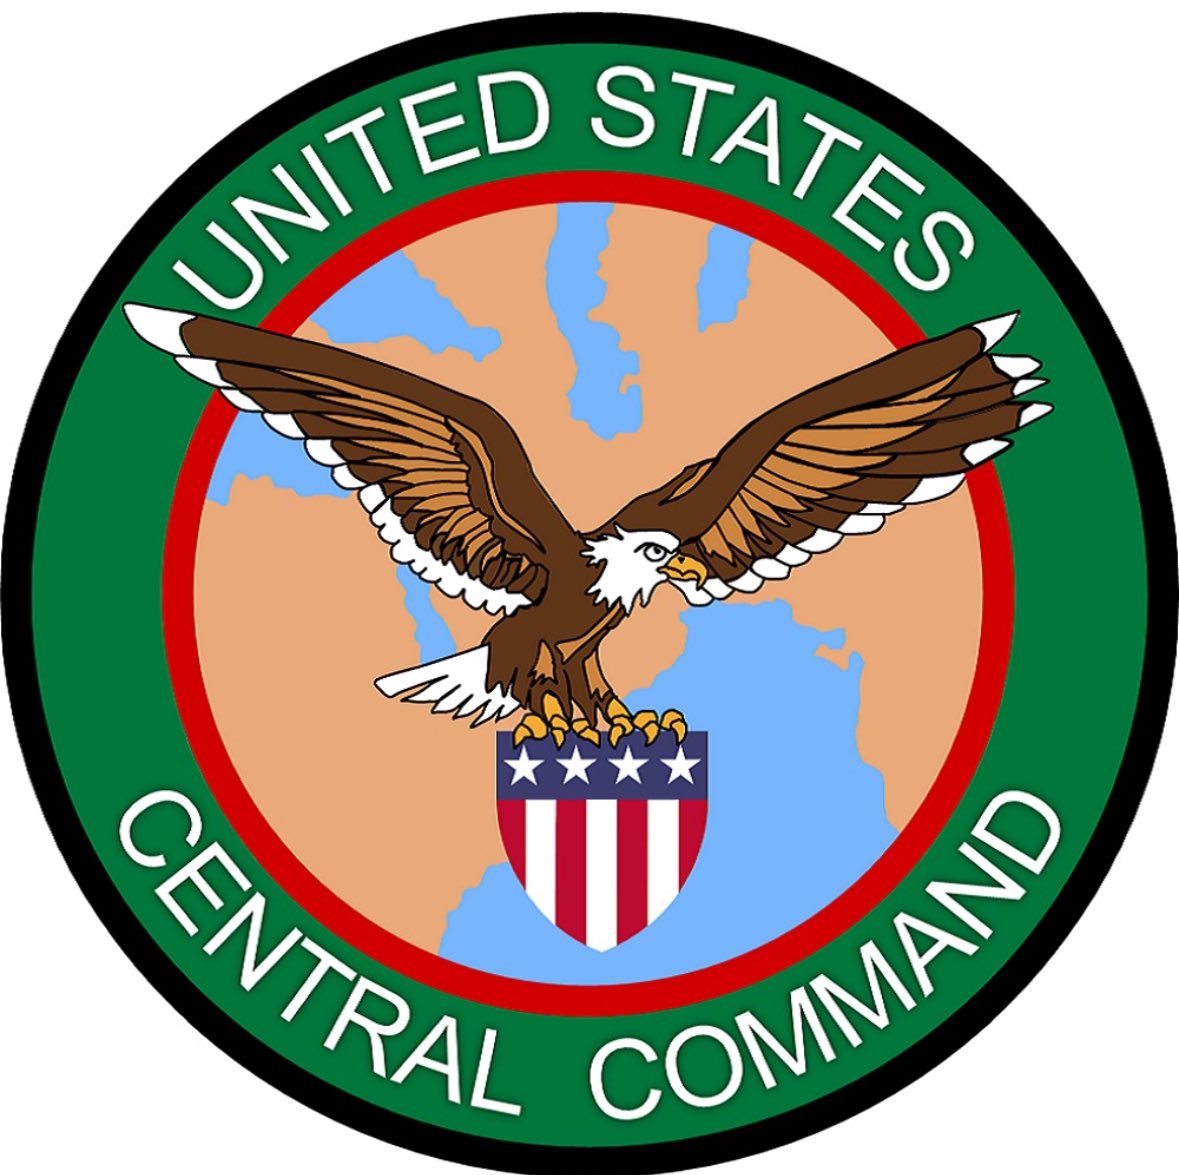 May 12 CENTCOM Update At approximately 3:30 a.m.(Sanaa time) on May 12, U.S. Central Command (USCENTCOM) forces successfully destroyed one uncrewed aerial system (UAS) launched by Iranian-backed Houthis over the Gulf of Aden from Houthi controlled areas in Yemen. There were no…